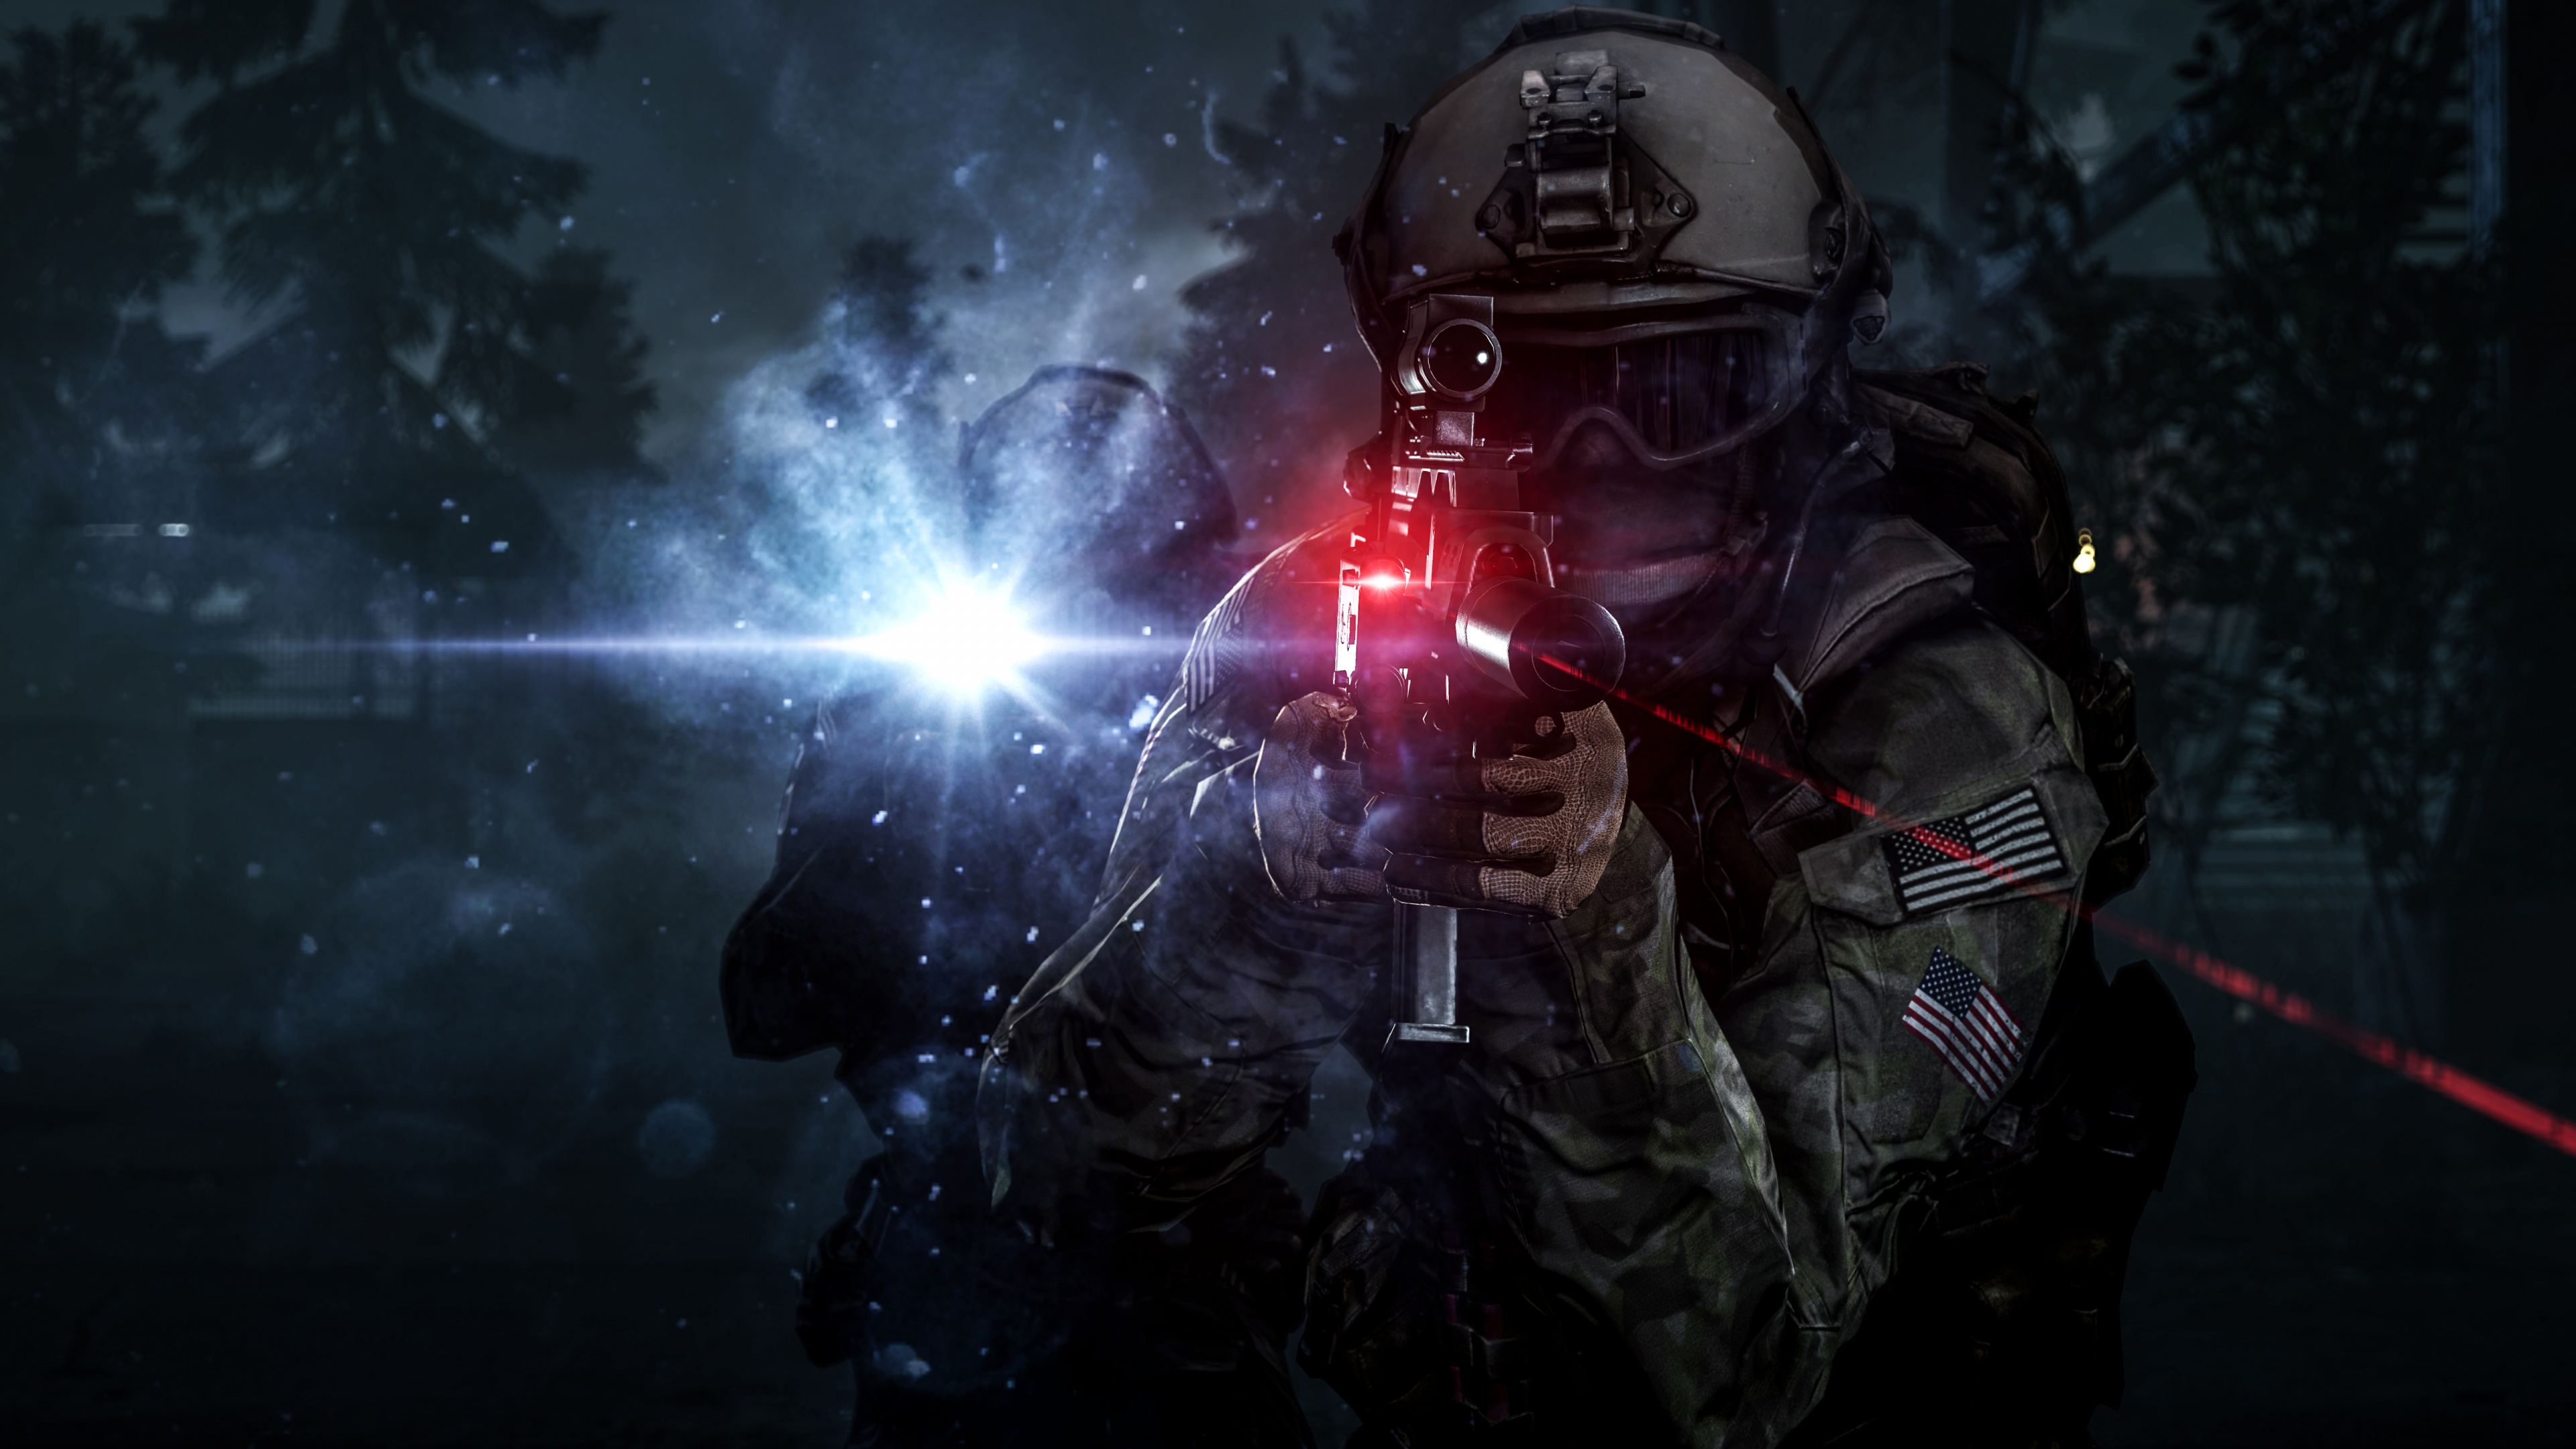 Jeu Pc, Obscurité, Espace, Android, Battlefield 4. Wallpaper in 3840x2160 Resolution